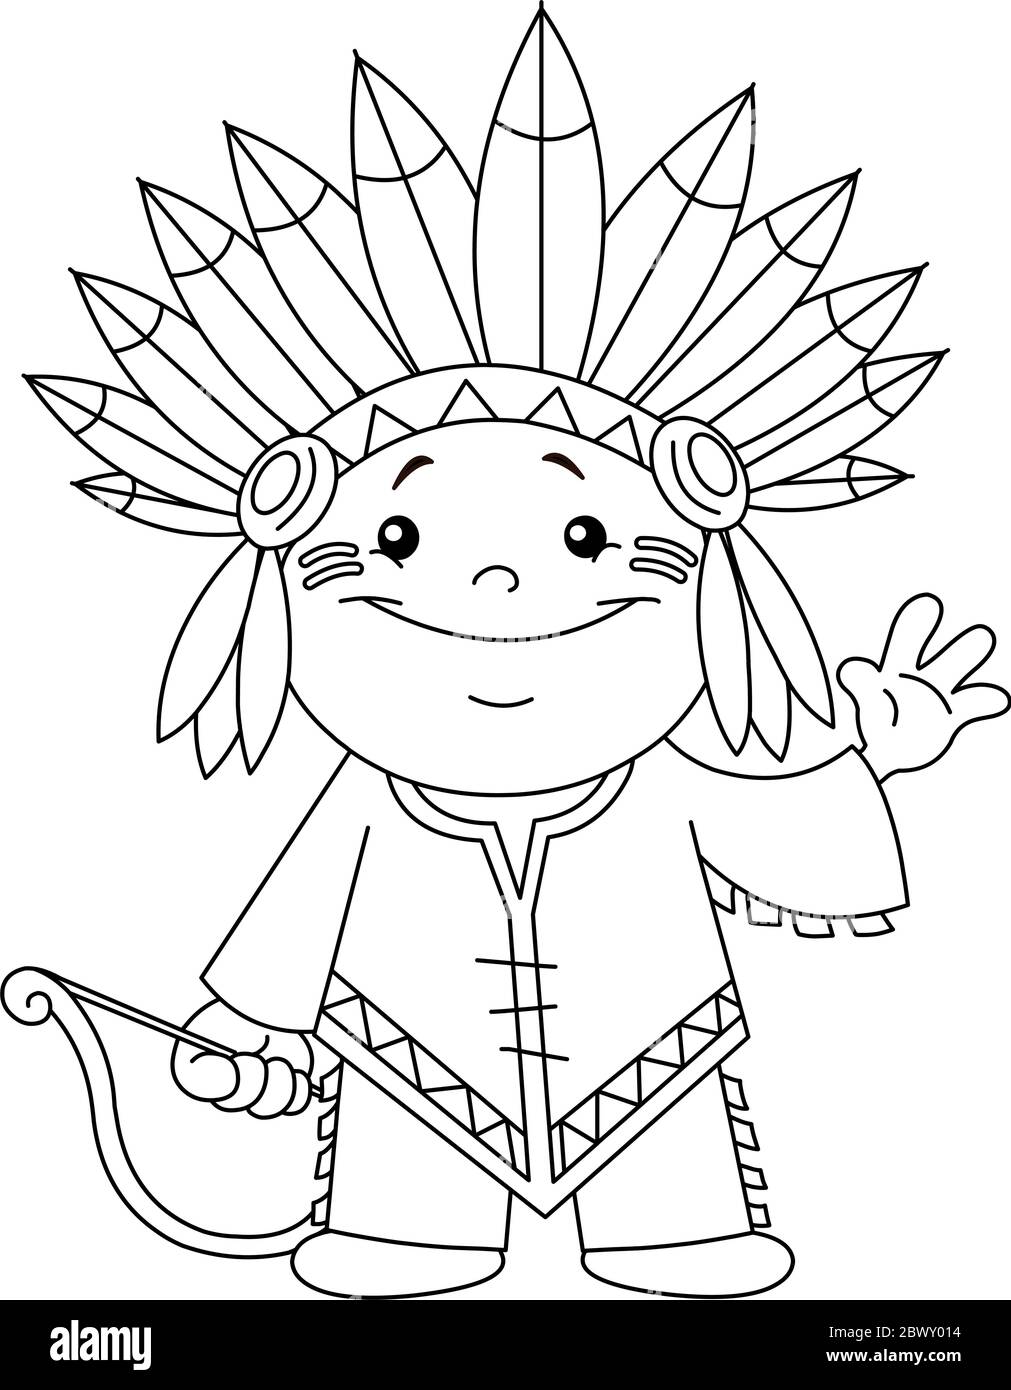 Coloring Pages Images – Browse 2,748,710 Stock Photos, Vectors